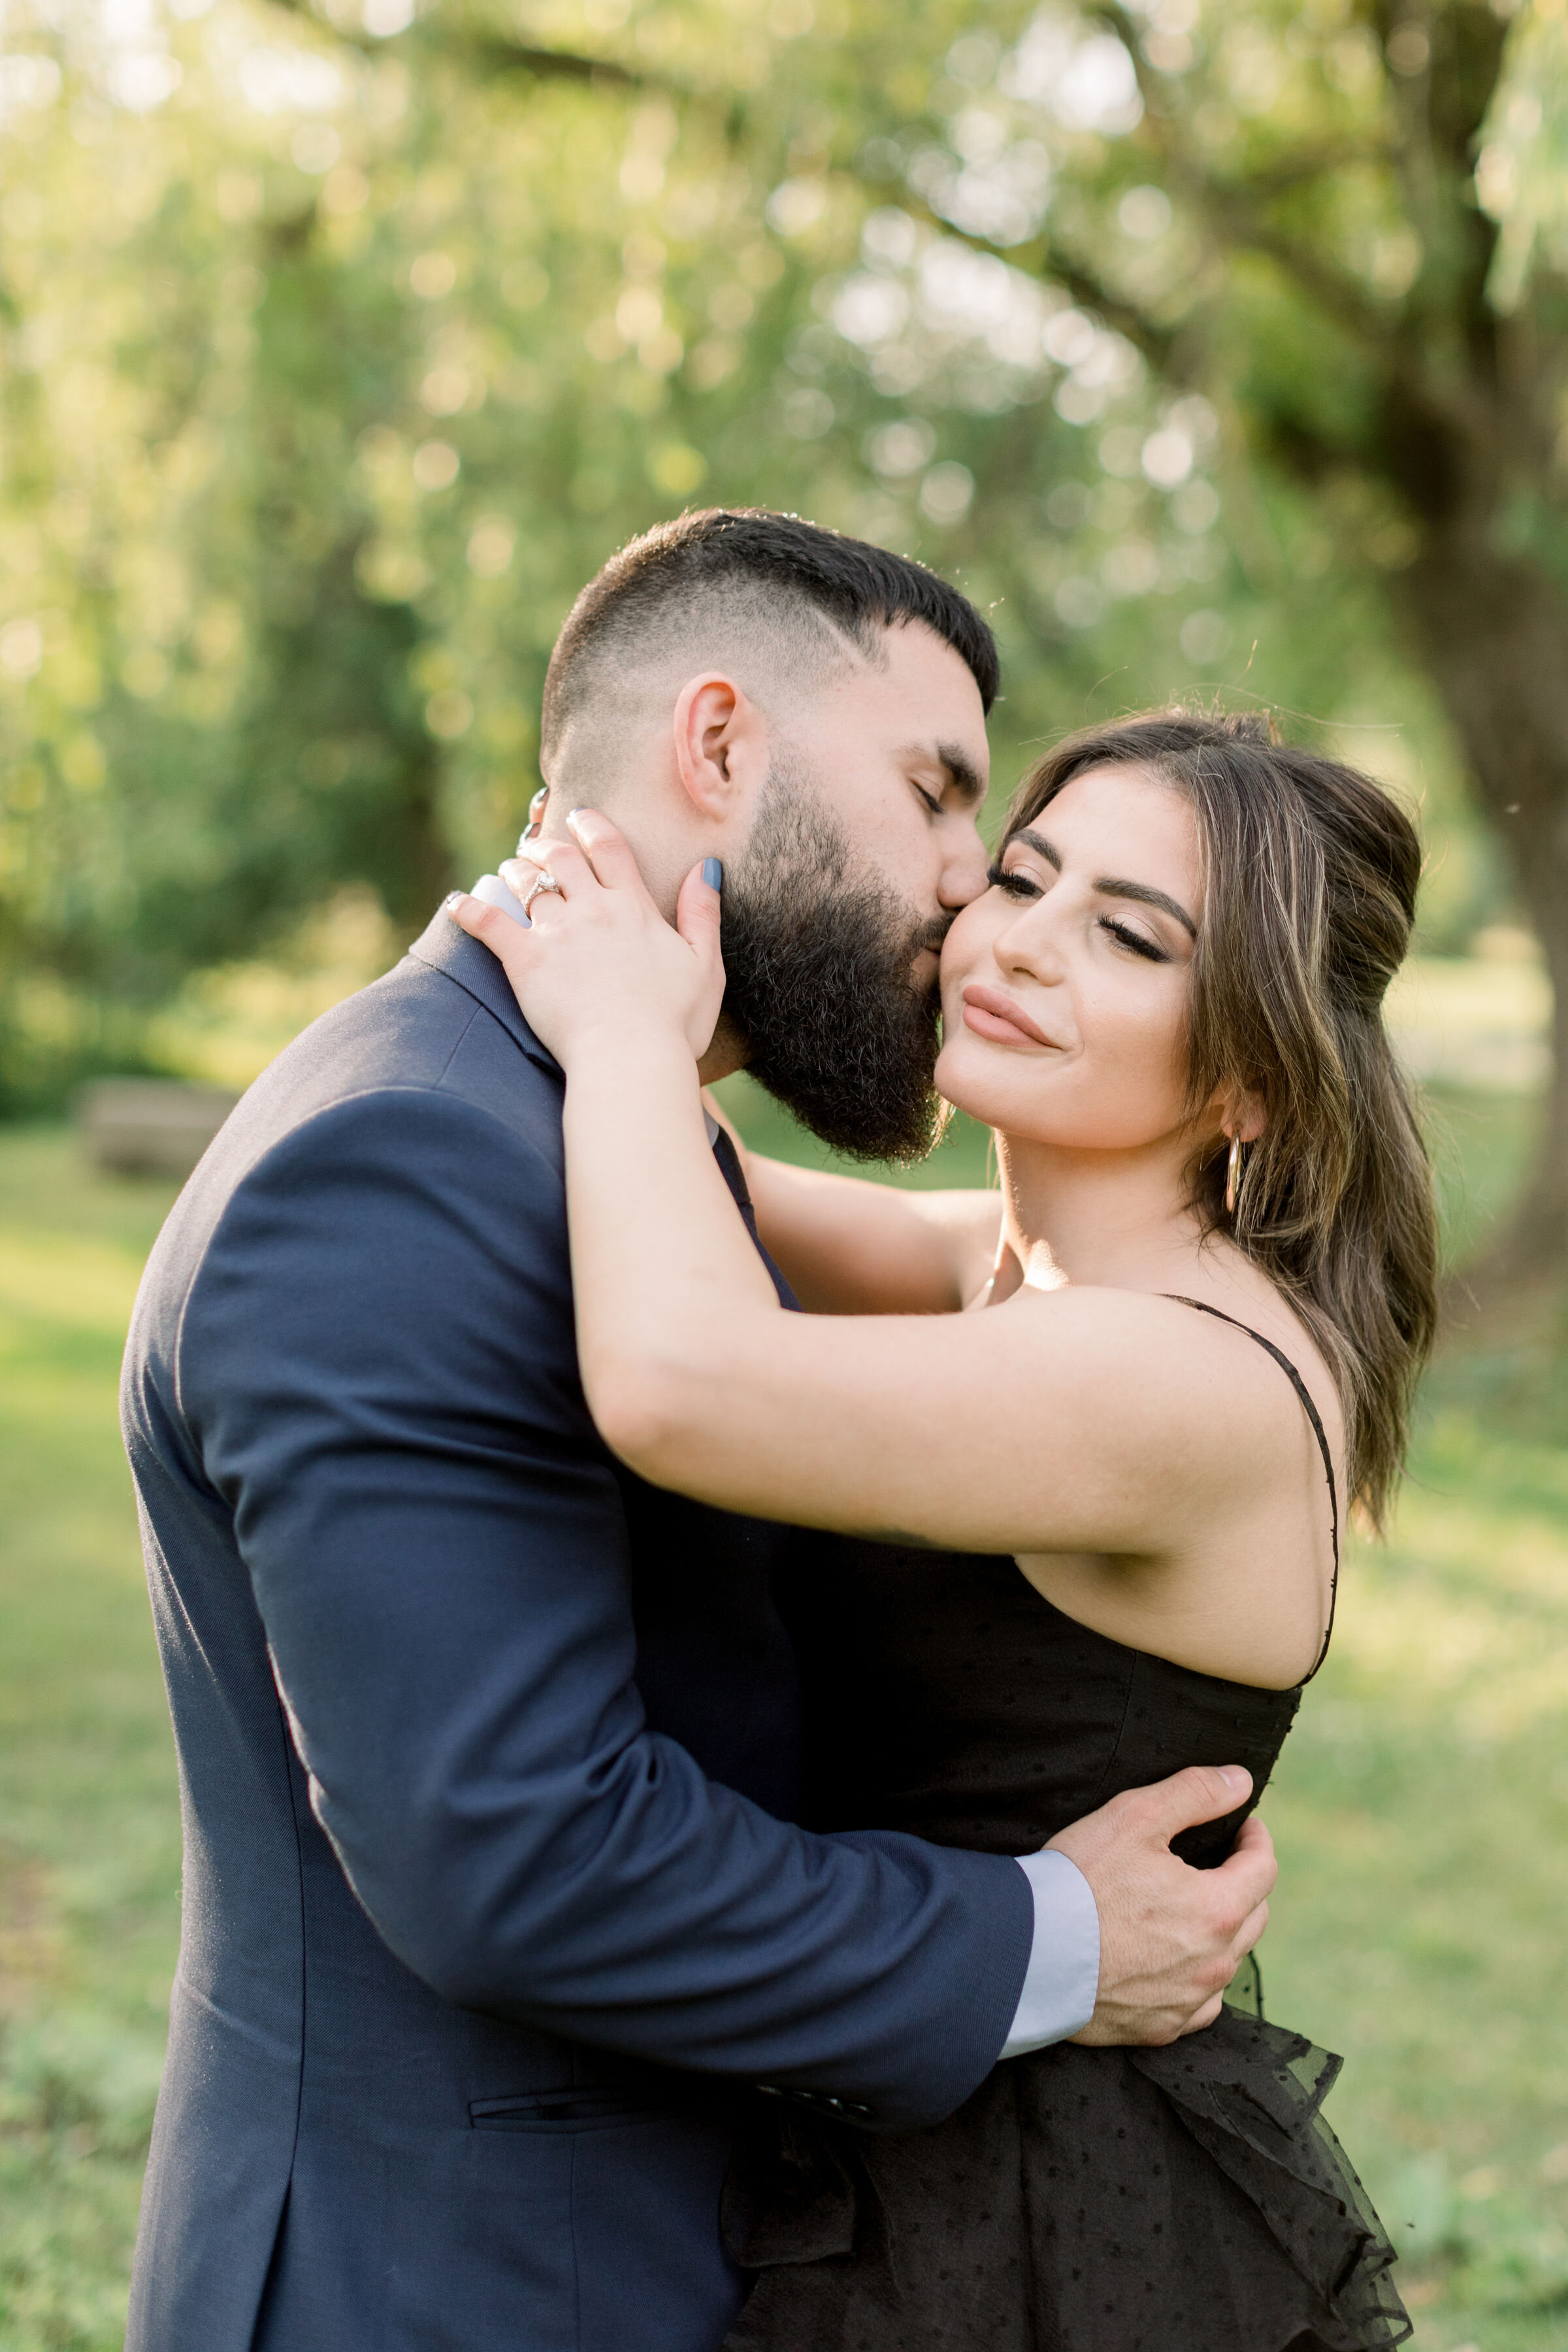  During this formal engagement shoot in Ottawa, Ontario, Chelsea Mason Photography captures this groom kiss his fiance's cheek romantically. women's formal black spaghetti strapped tea dress man kissing woman's cheek Ottawa Canada engagement photogra